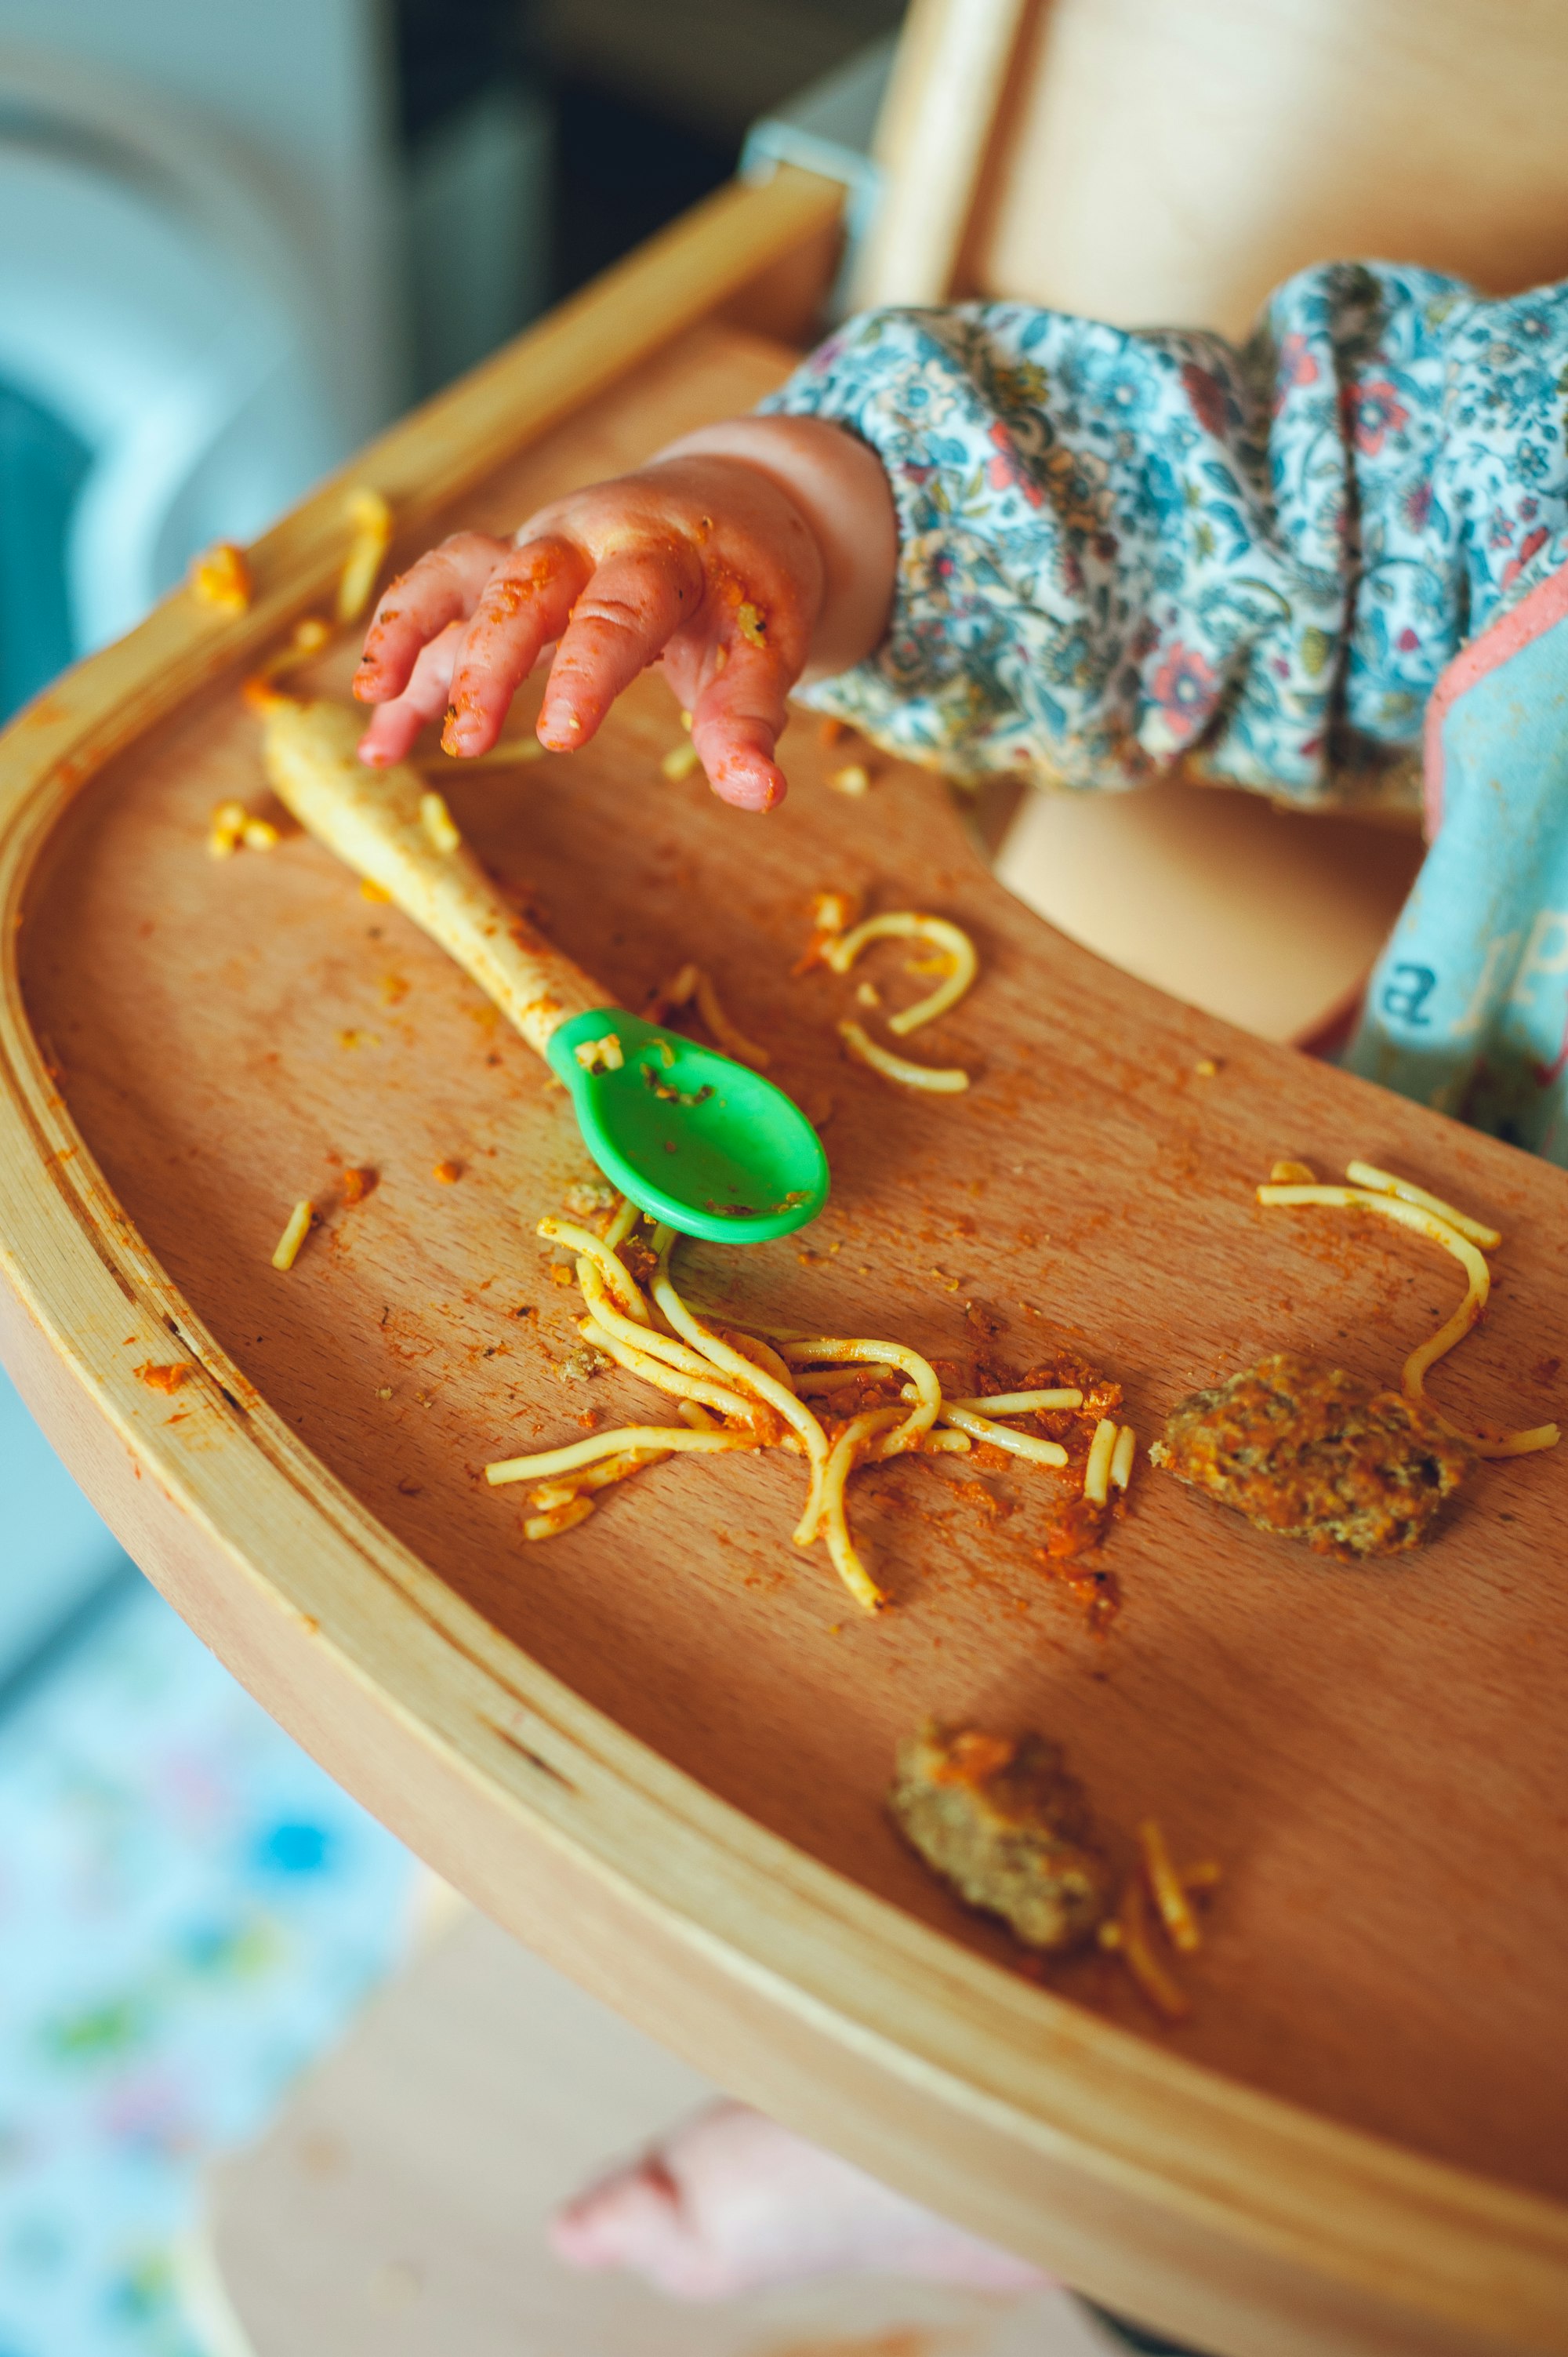 Toddler in a wooden high chair eating spaghetti in a tomato sauce 